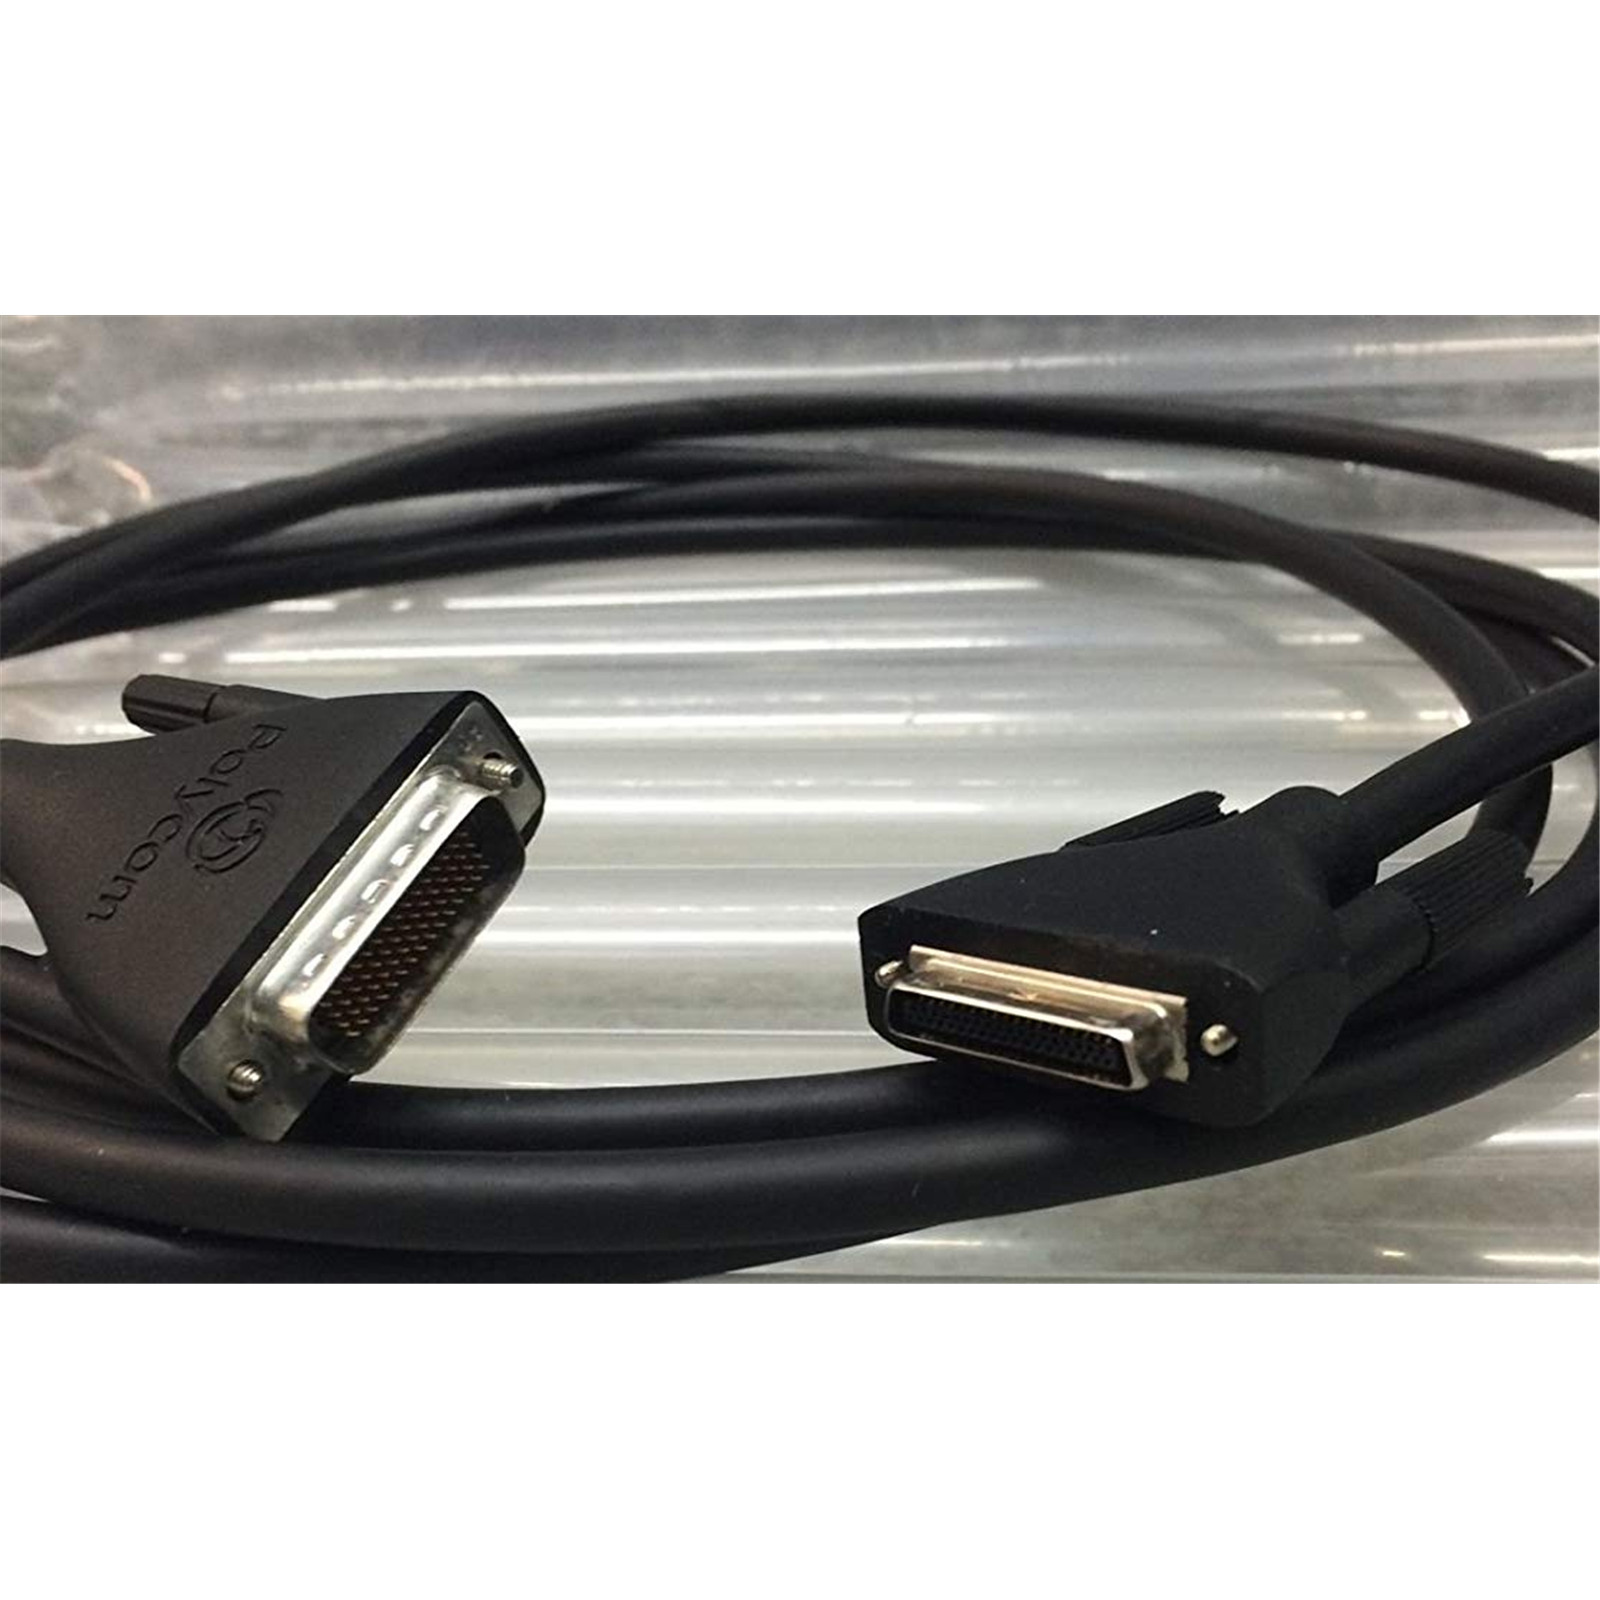 POLY 2457-64356-001 CAMERA CABLE FOR EAGLEEYE IV CAMERAS MIN --BY Polycom